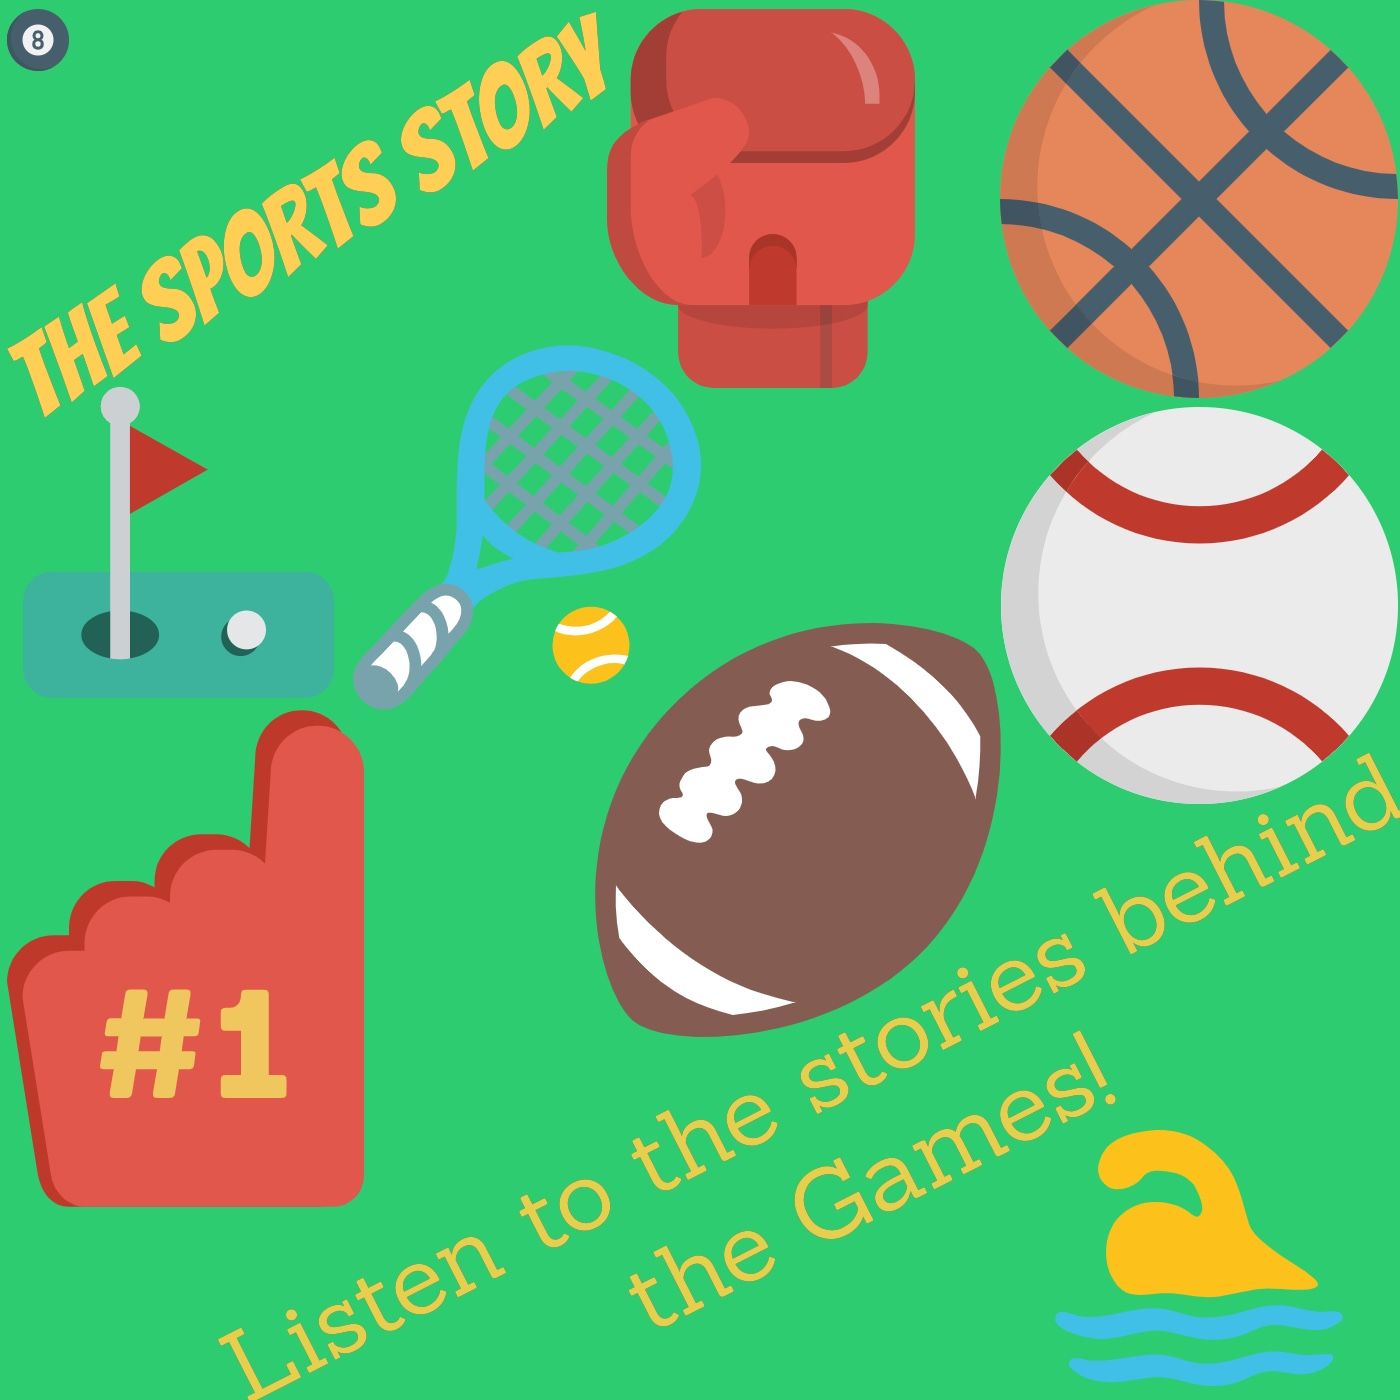 THE SPORTS STORY